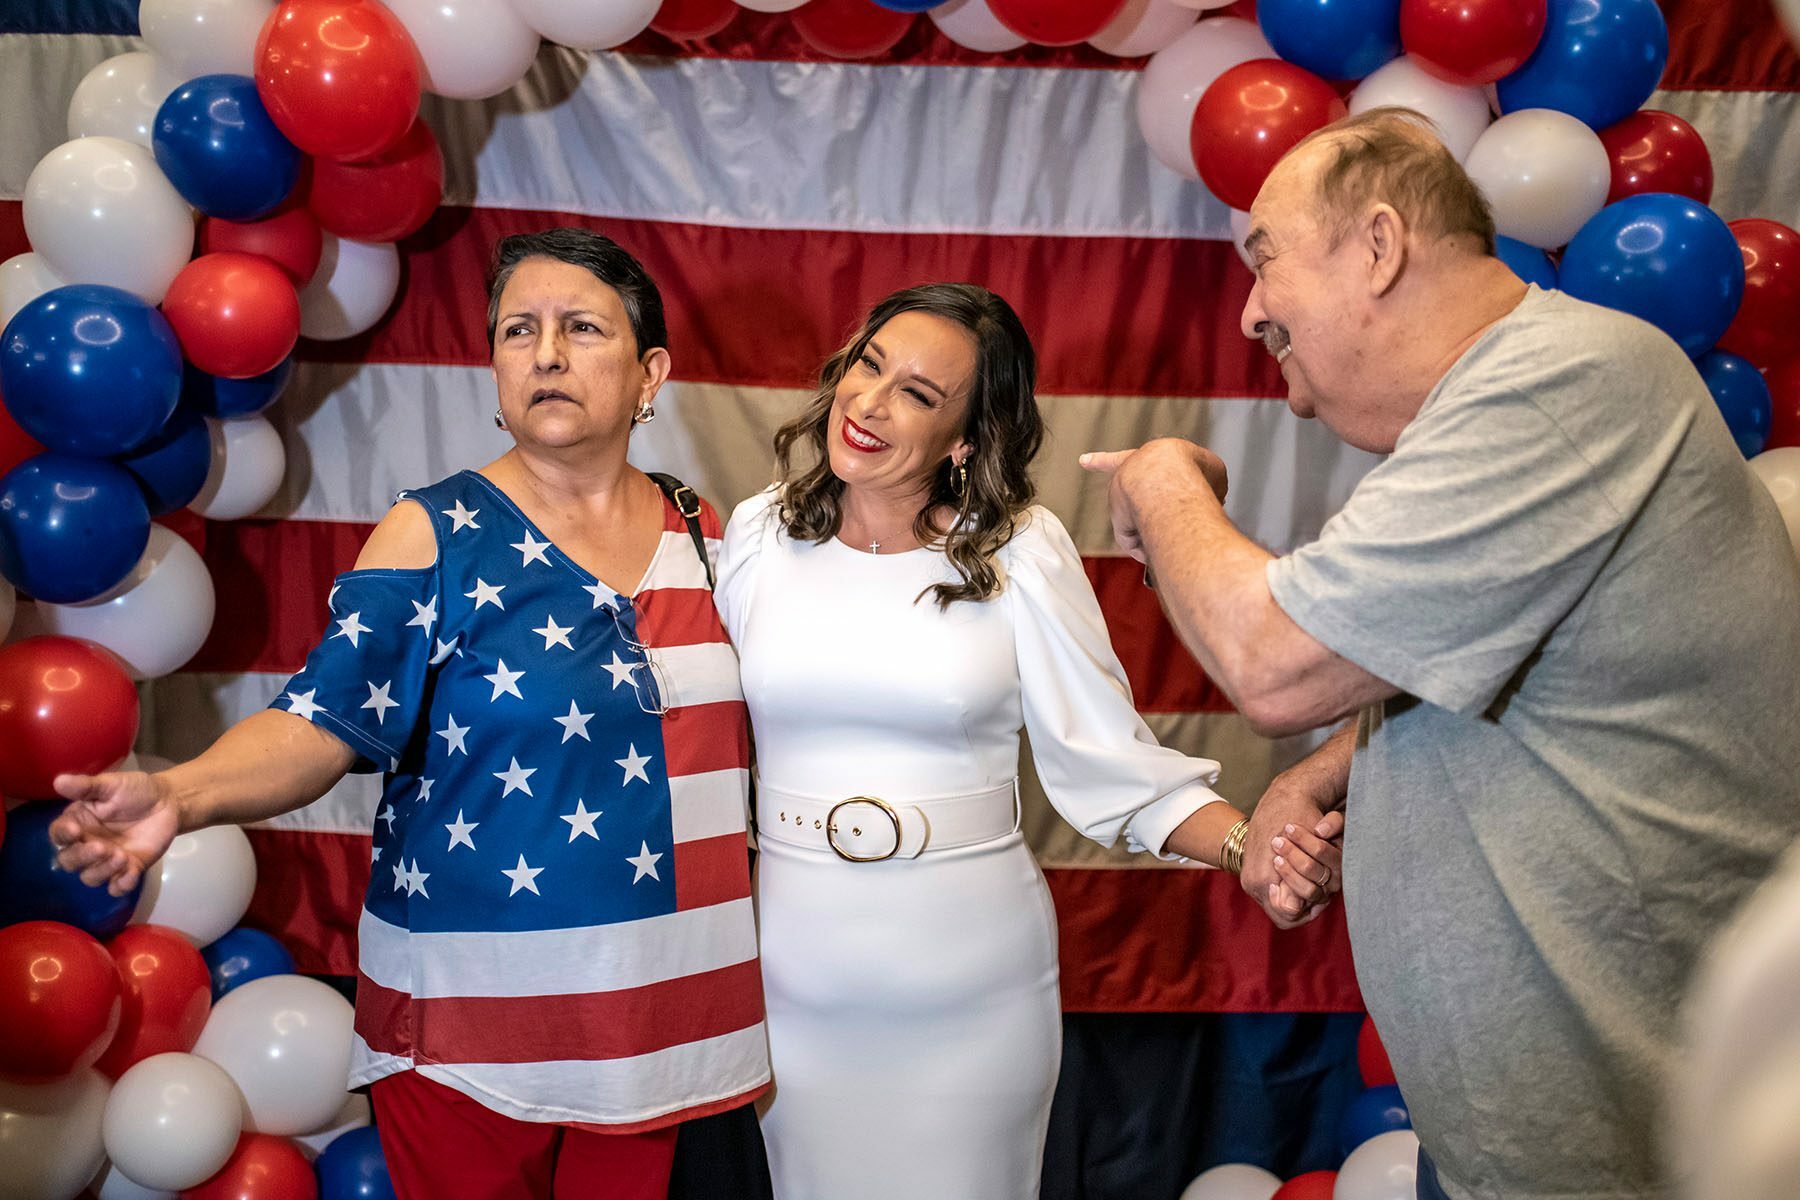 Monica De La Cruz and a supporter wearing an American flag shirt pose in front of red, white and blue balloons at her election night party.